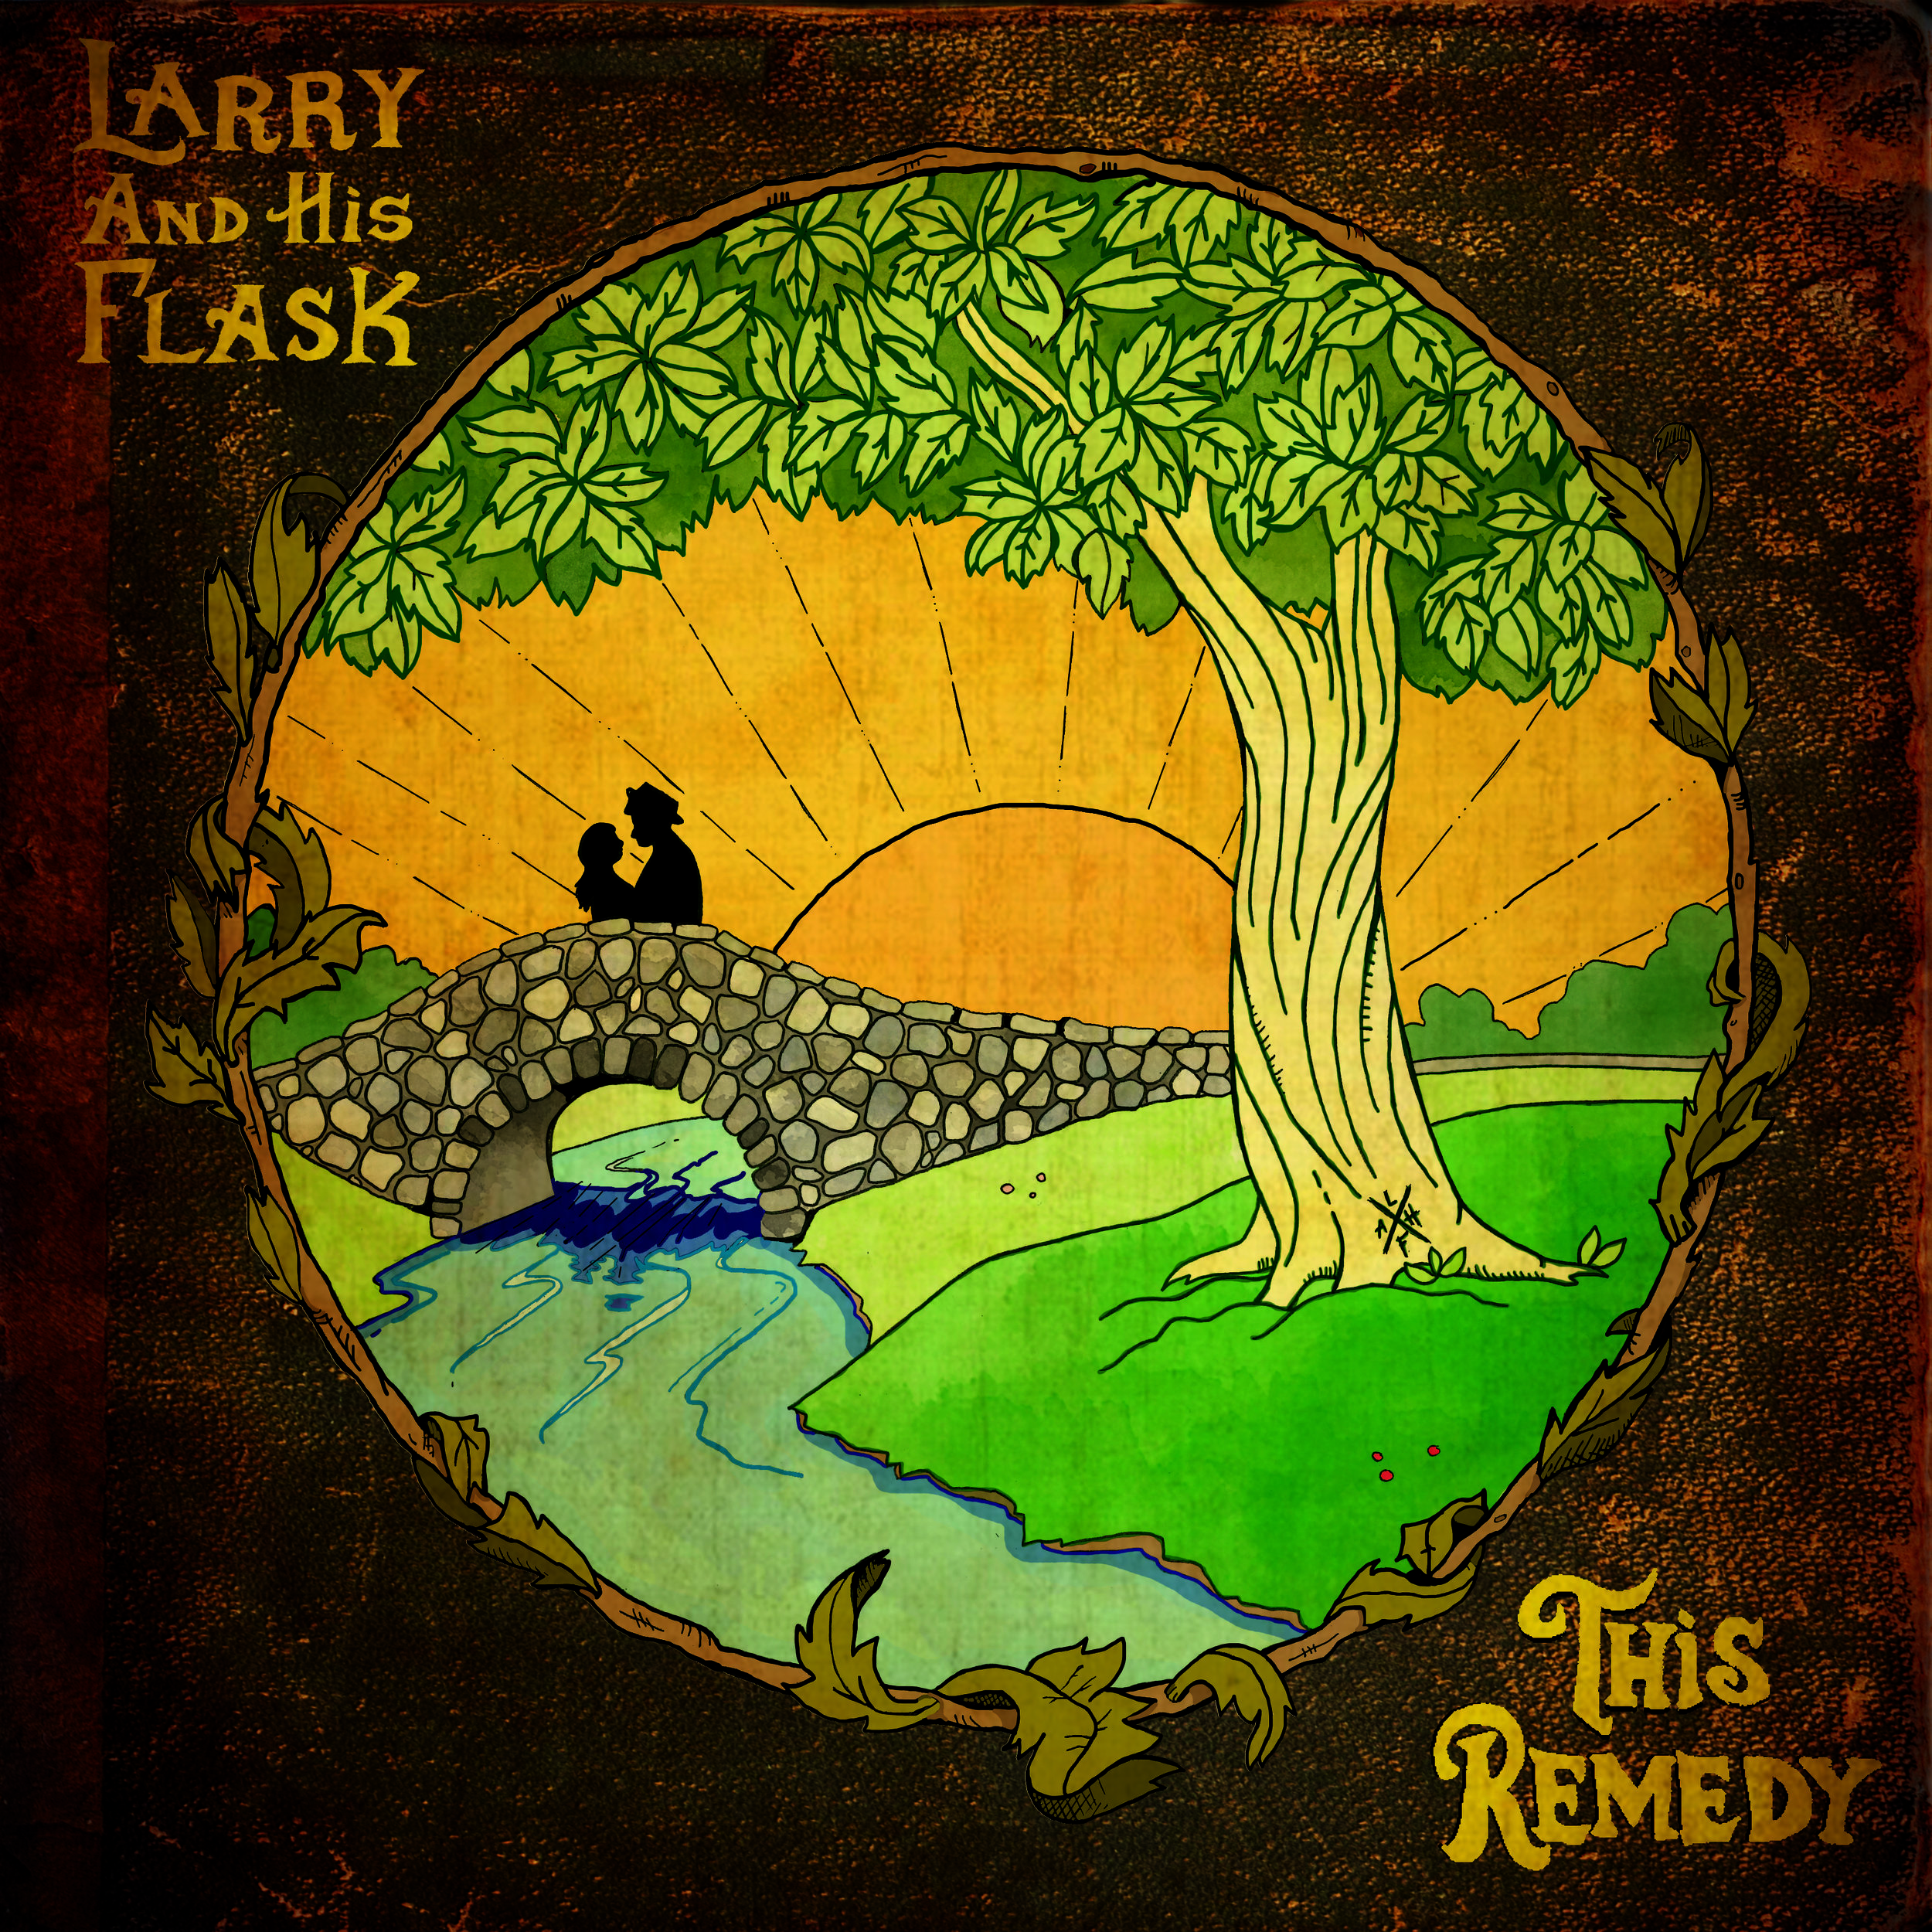  Album Art for "This Remedy" for the band Larry And His Flask. 2018.&nbsp; 